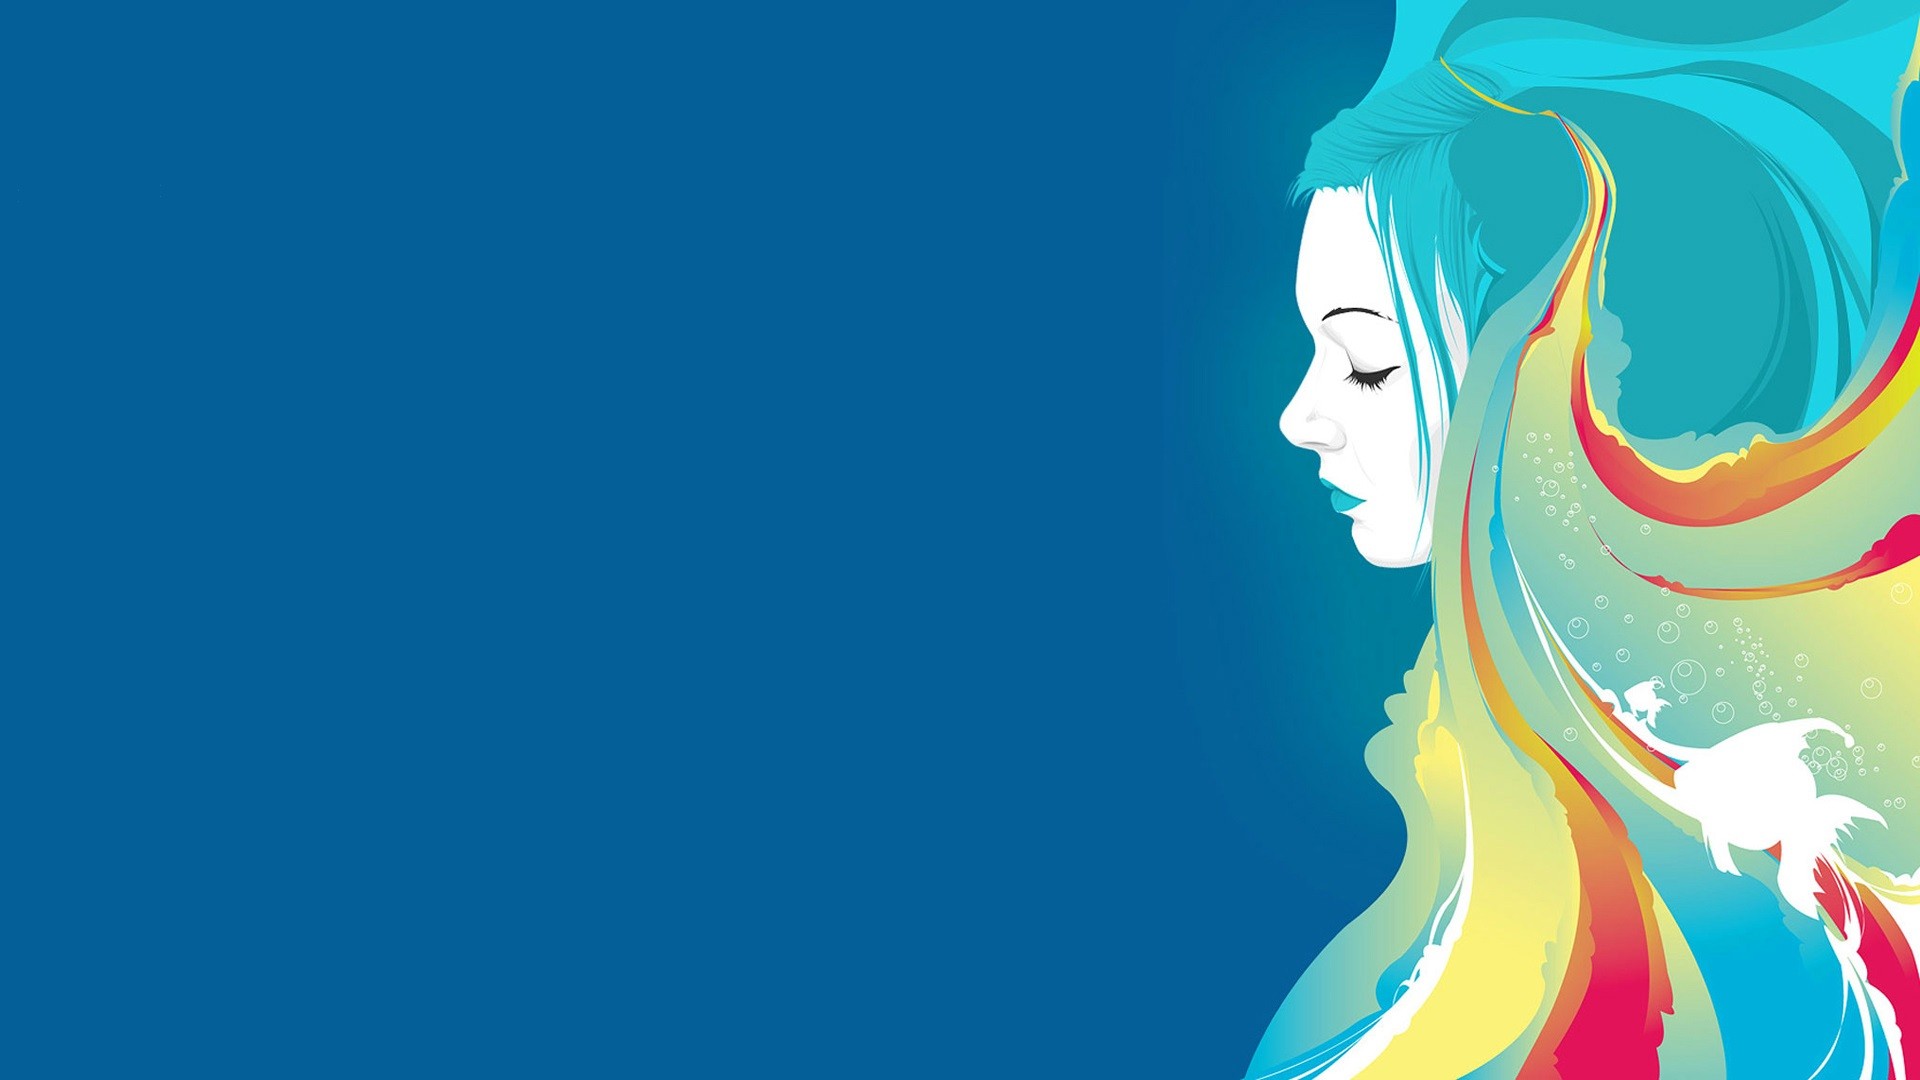 General 1920x1080 drawing women blue colorful fish blue background turquoise hair face profile cyan hair simple background artwork closed eyes